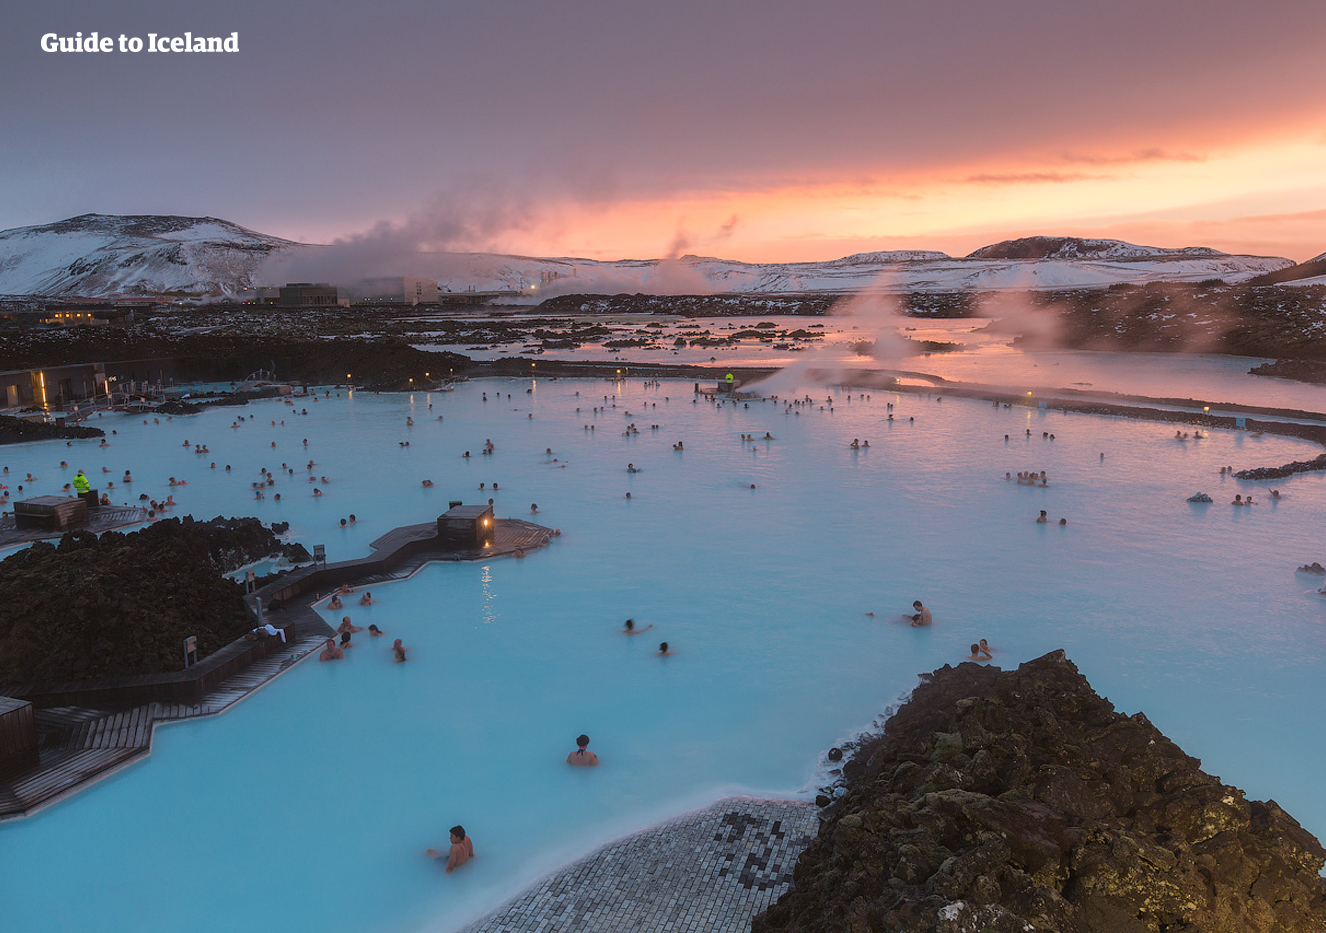 Unwind in the warm, azure waters of the Blue Lagoon before your flight home.